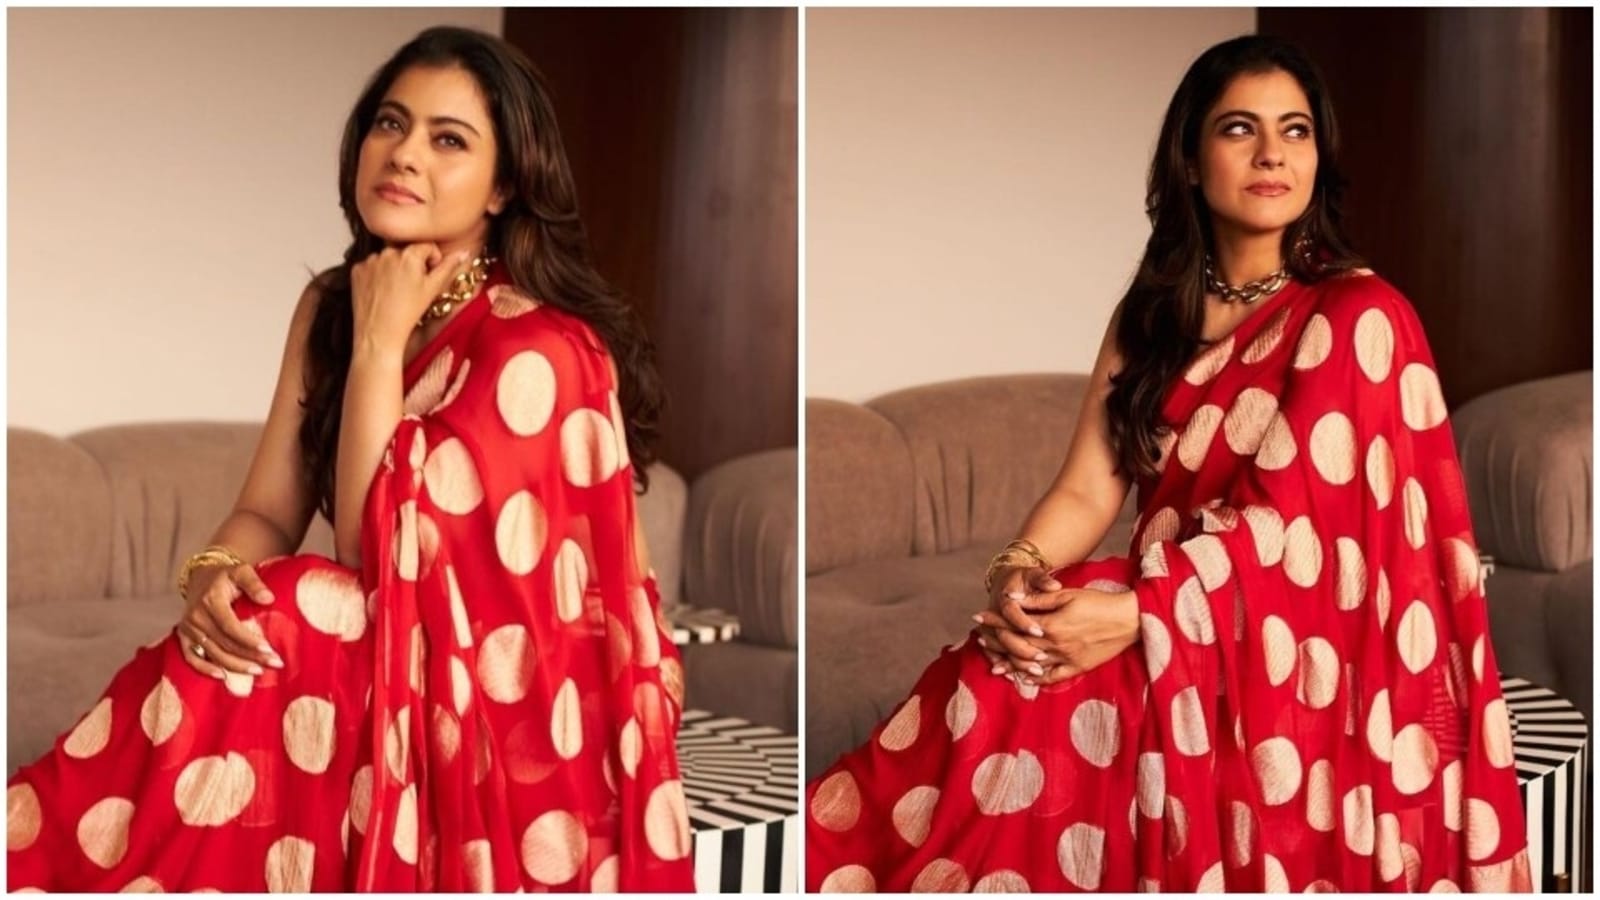 Kajol serves retro vibes in bright red polka dot saree, brides-to-be take  notes for upgrading your wedding collection | Fashion Trends - Hindustan  Times